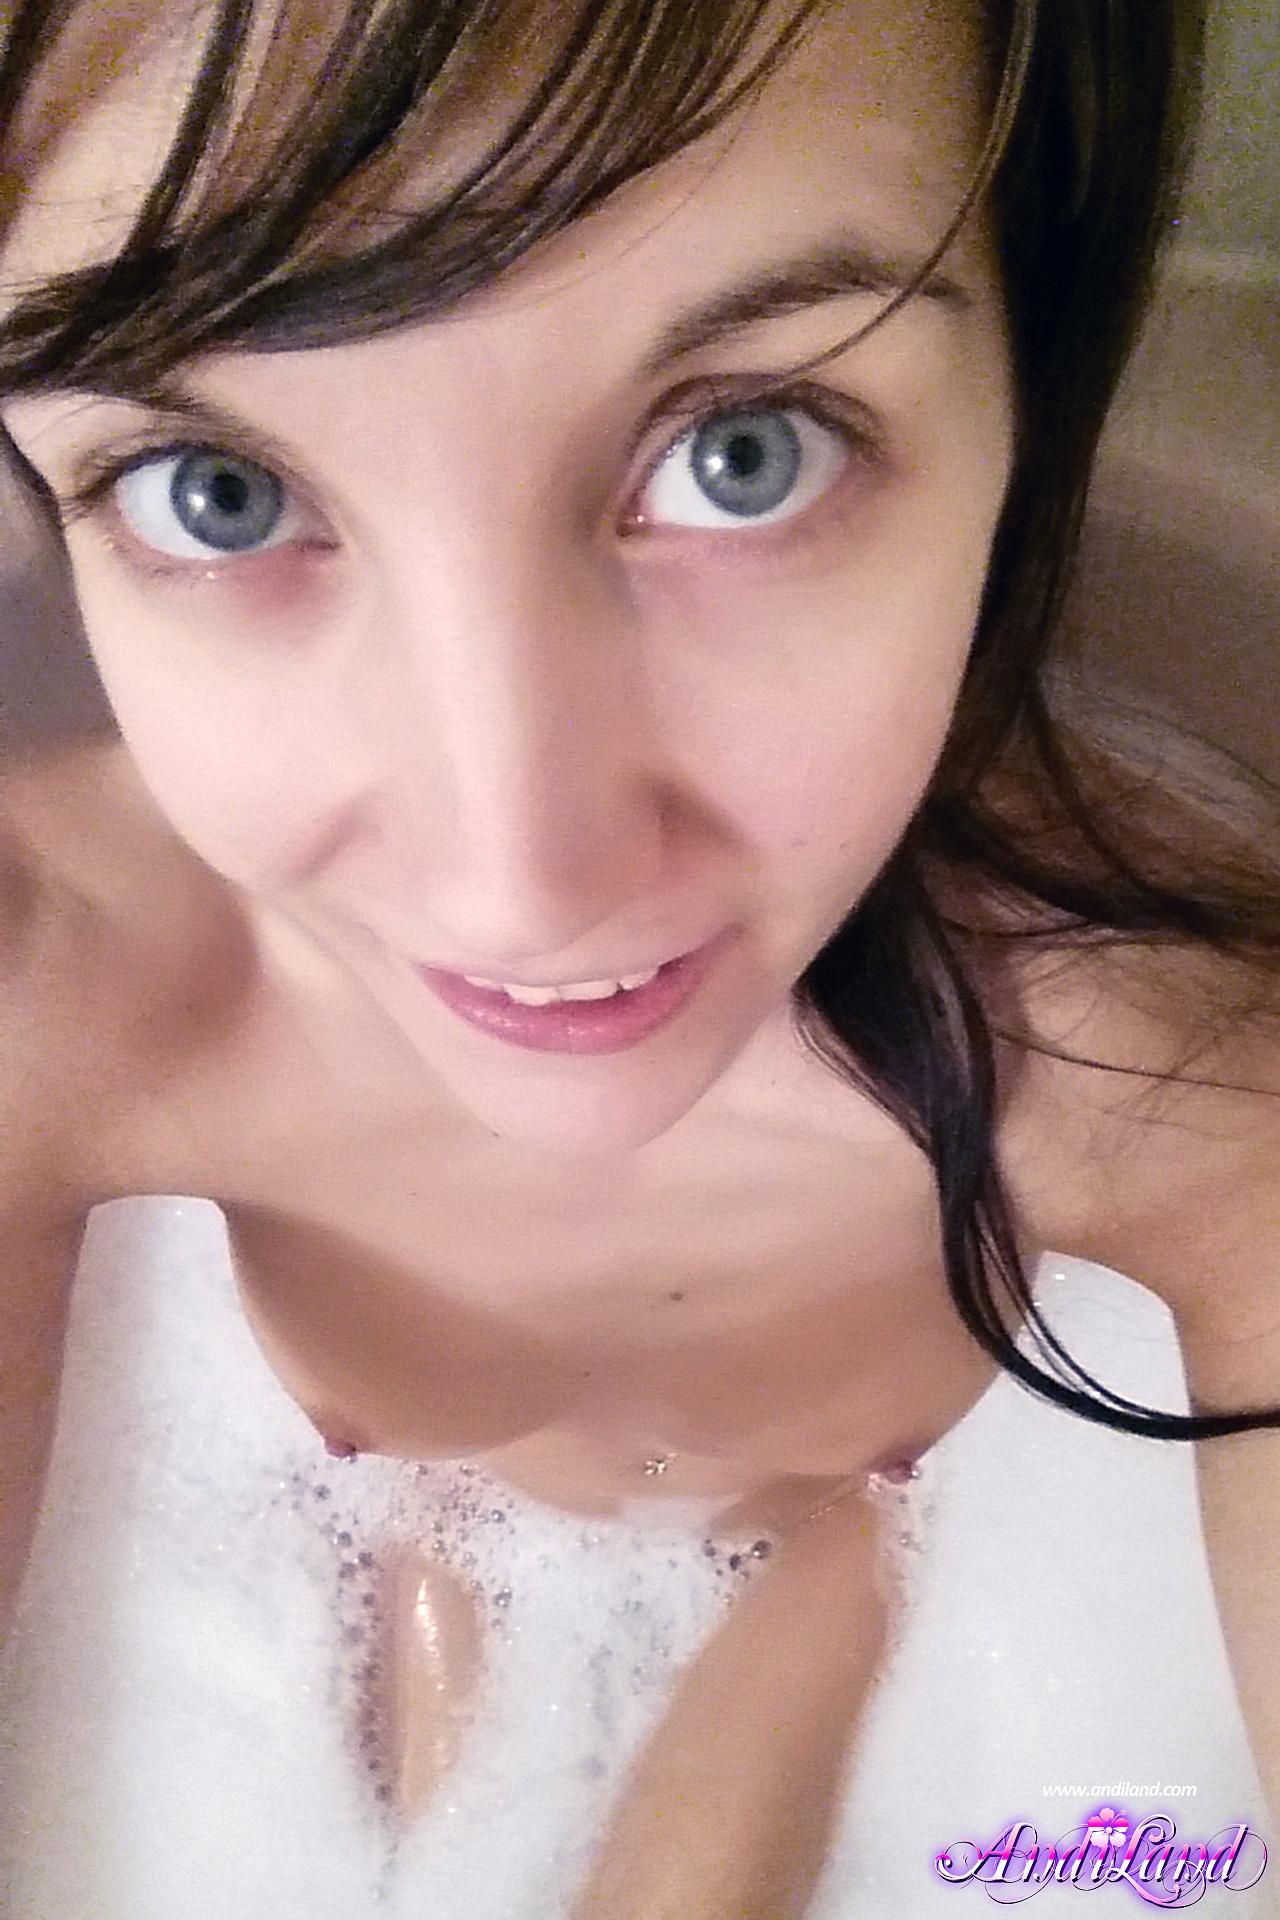 Andi Land takes some selfies for you in the bath #53134893